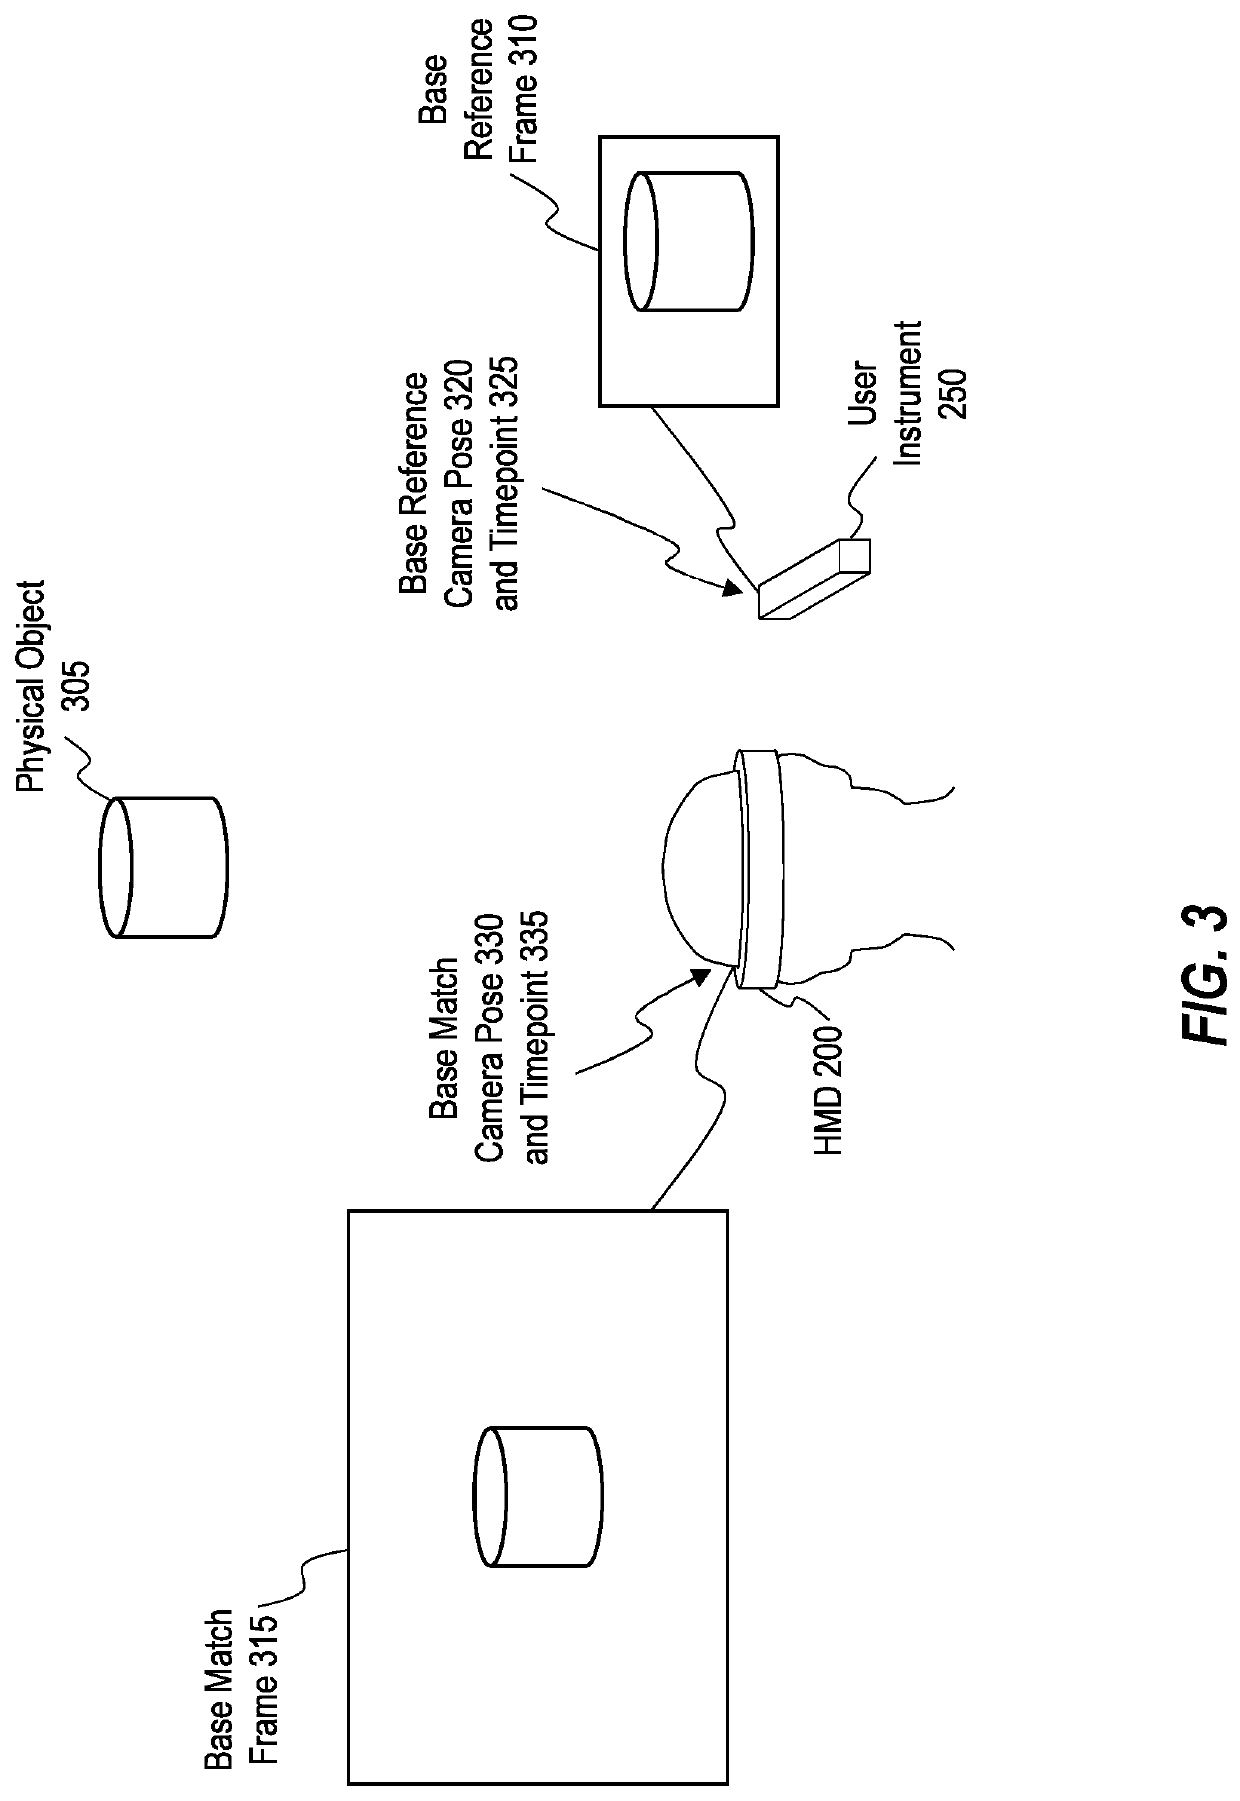 Systems and methods for reducing a search area for identifying correspondences between images